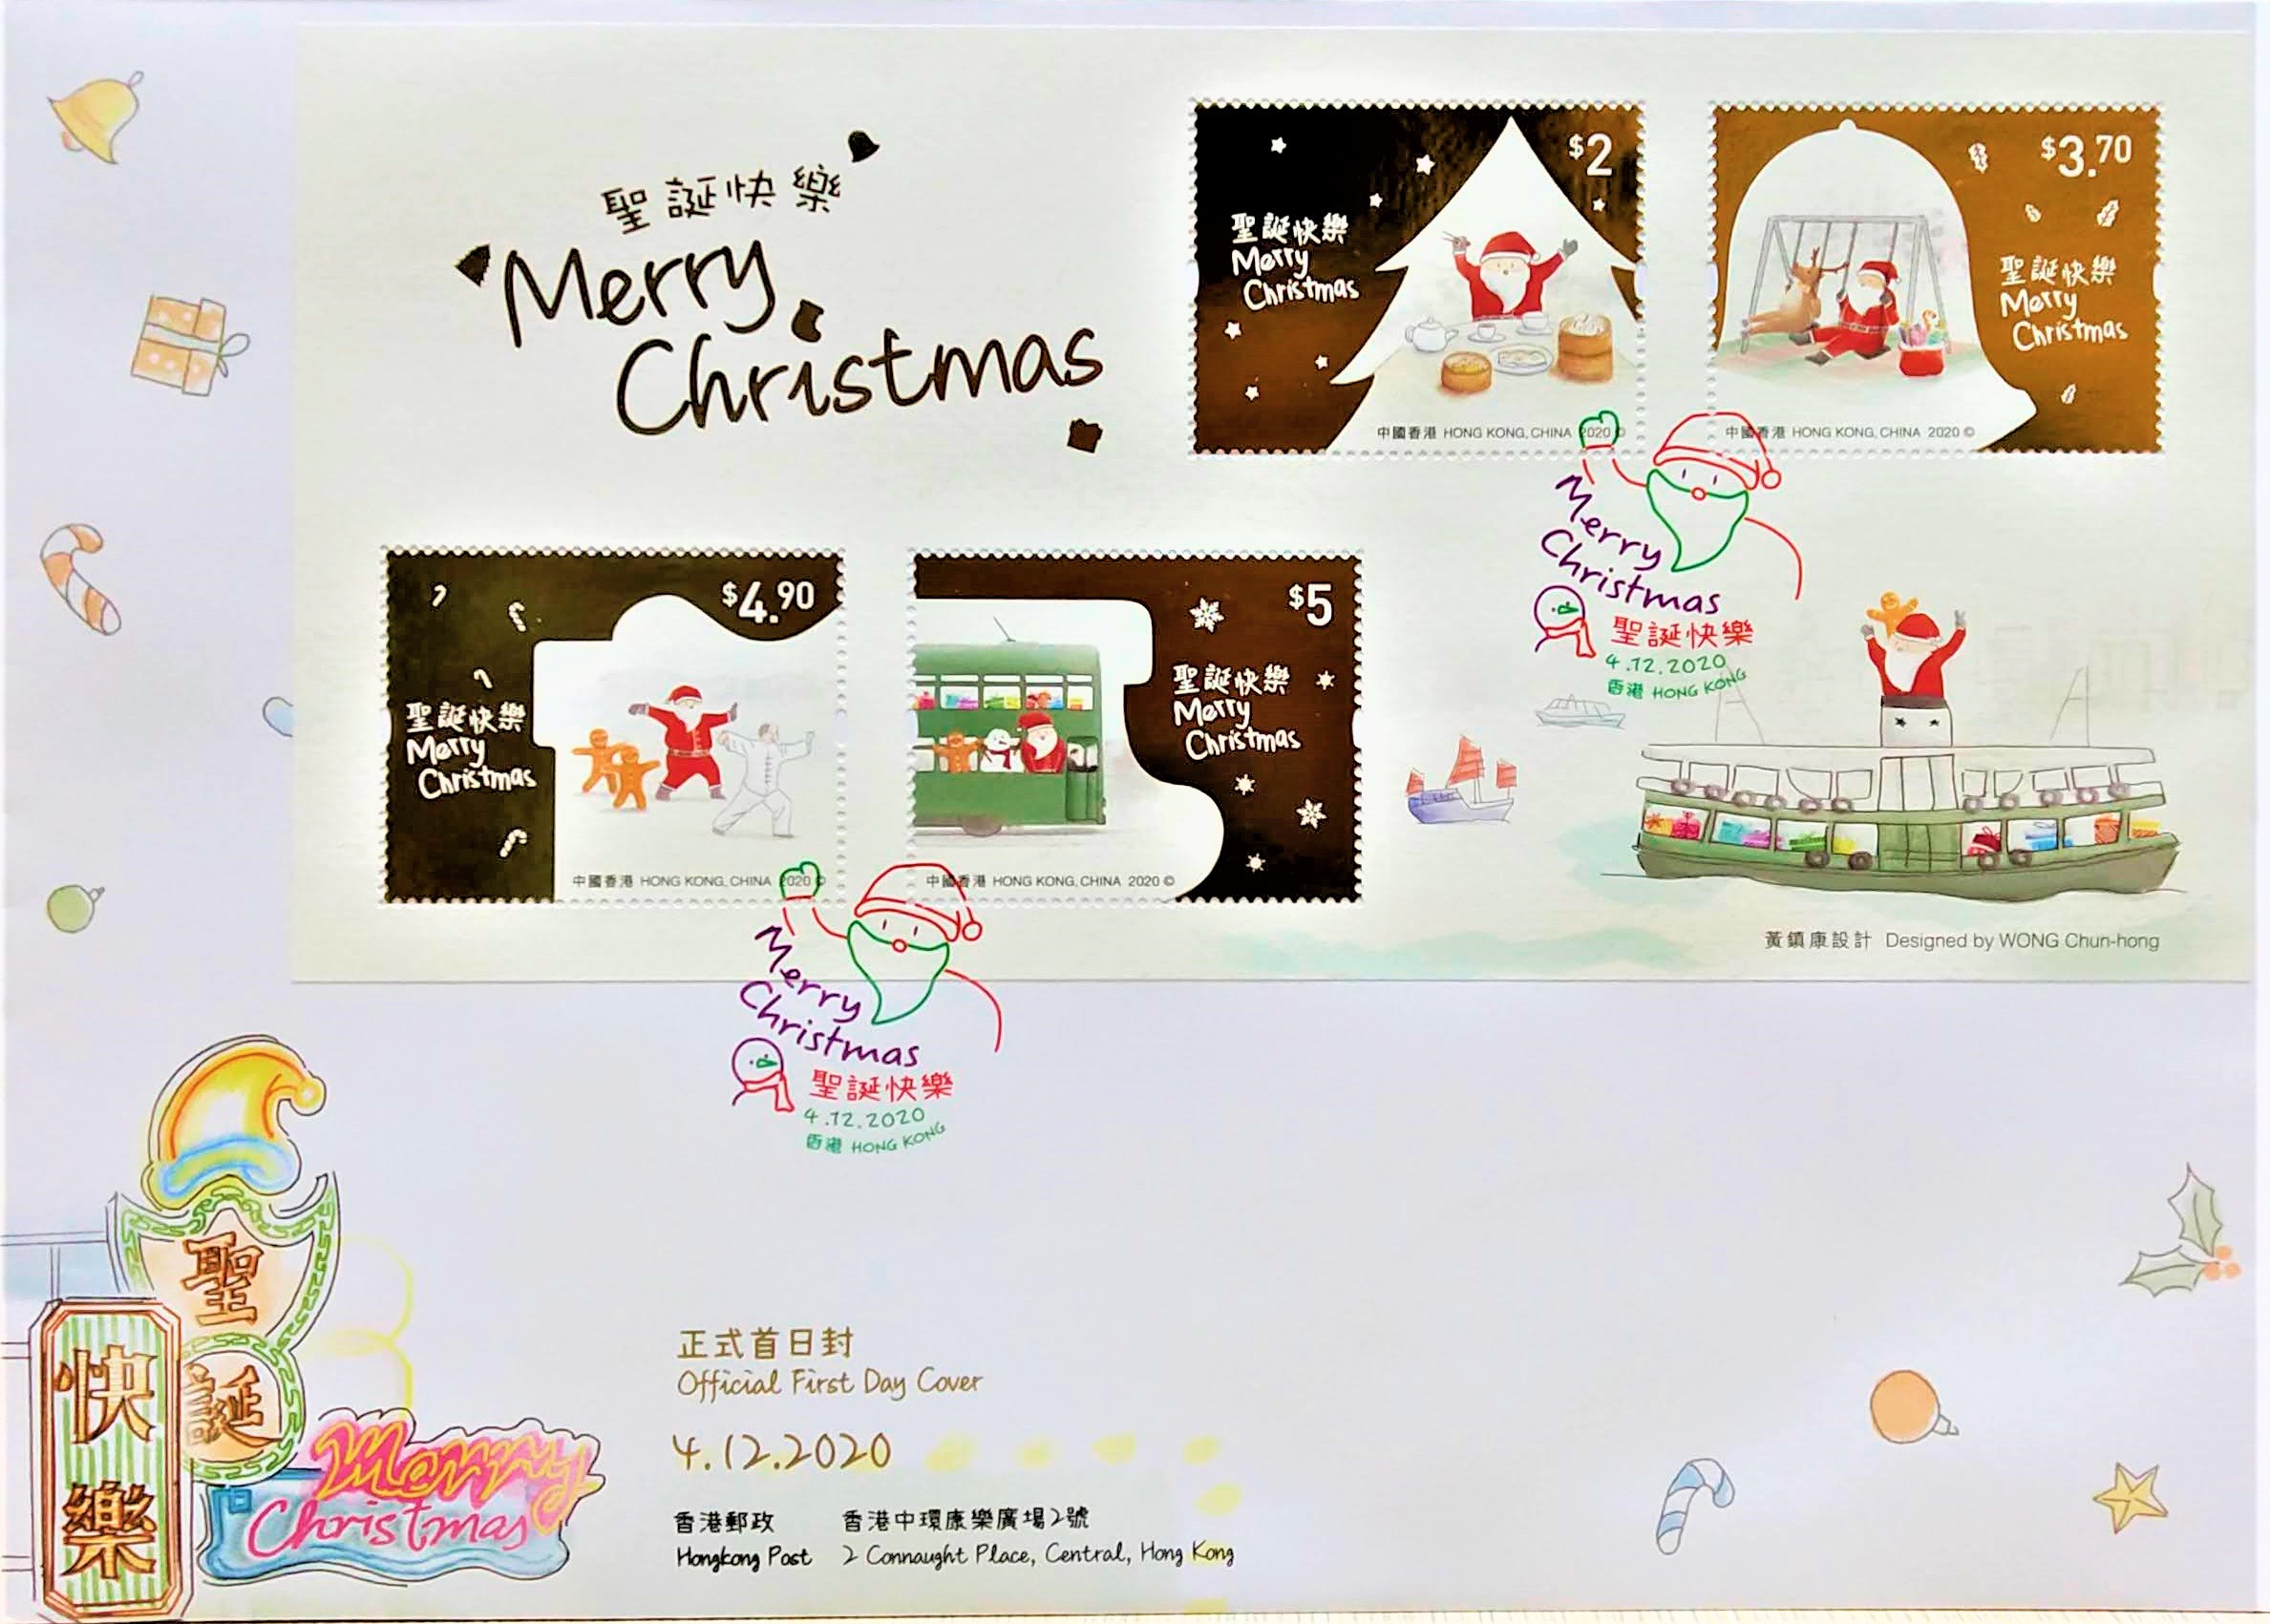 2020 Christmas stamps official first day cover